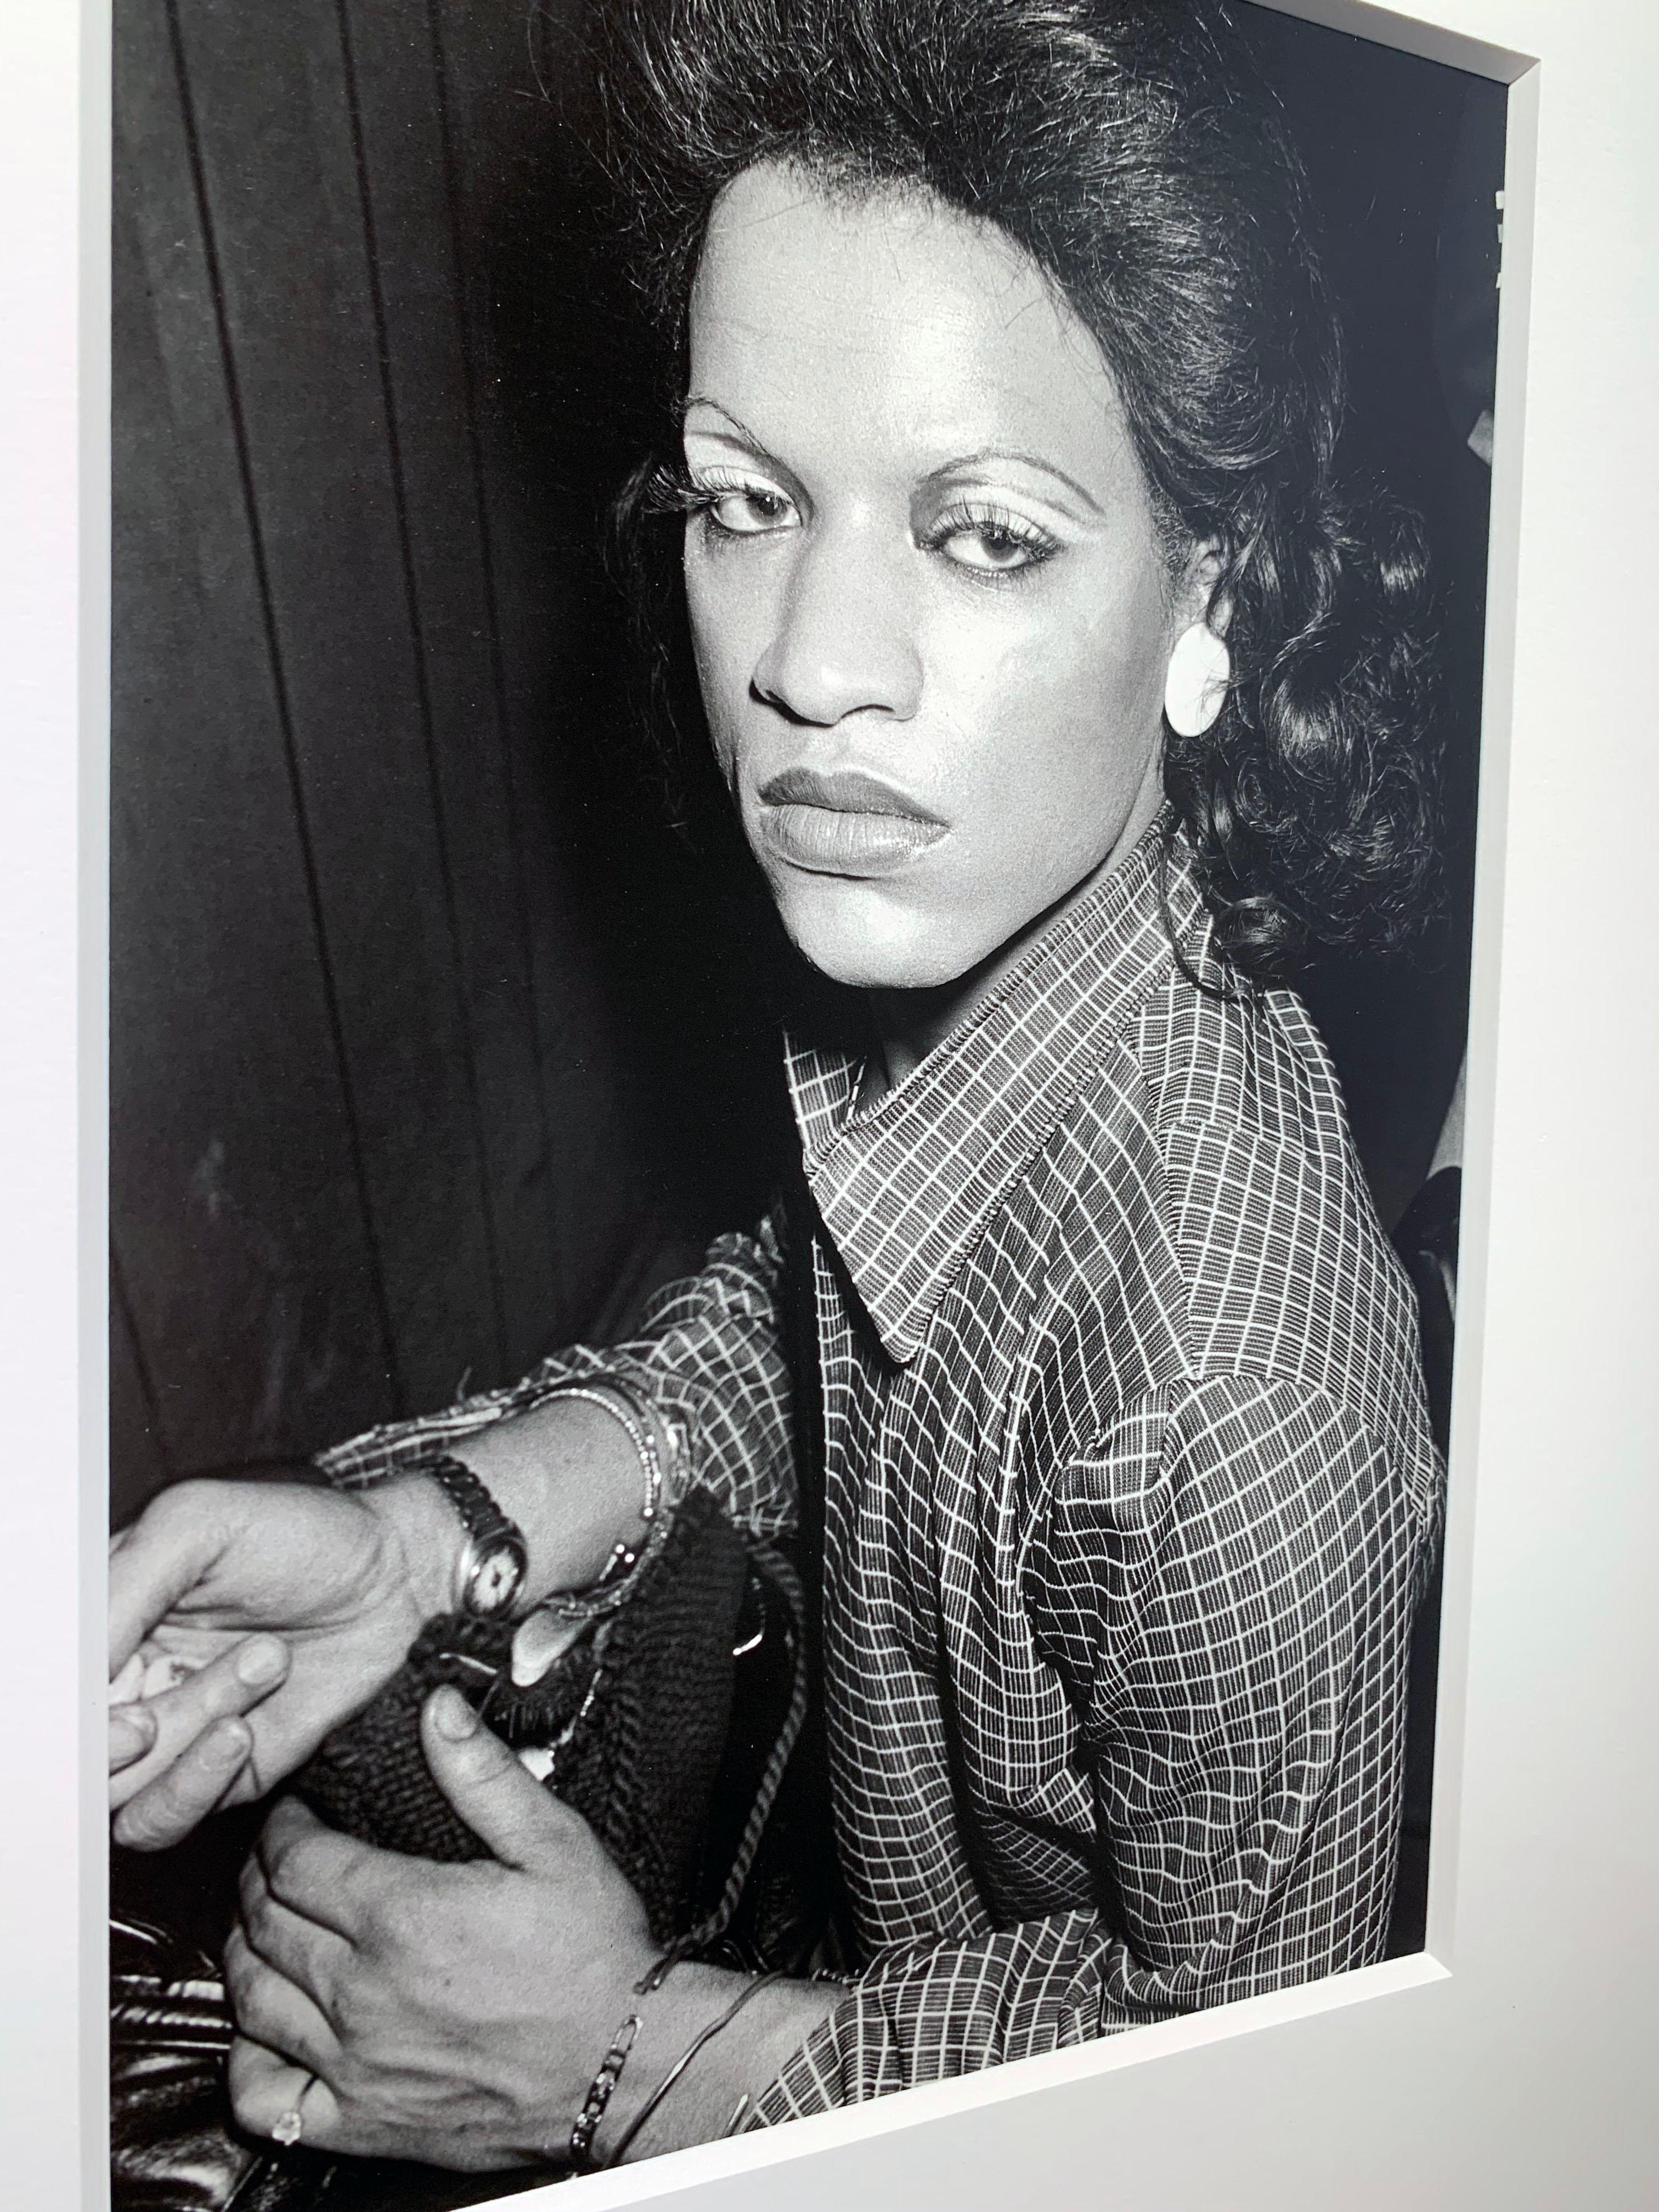 #112, 1970s Nightclubs of Chicago South Side - Rare Vintage Silver Gelatin Print - Black Portrait Photograph by Michael Abramson